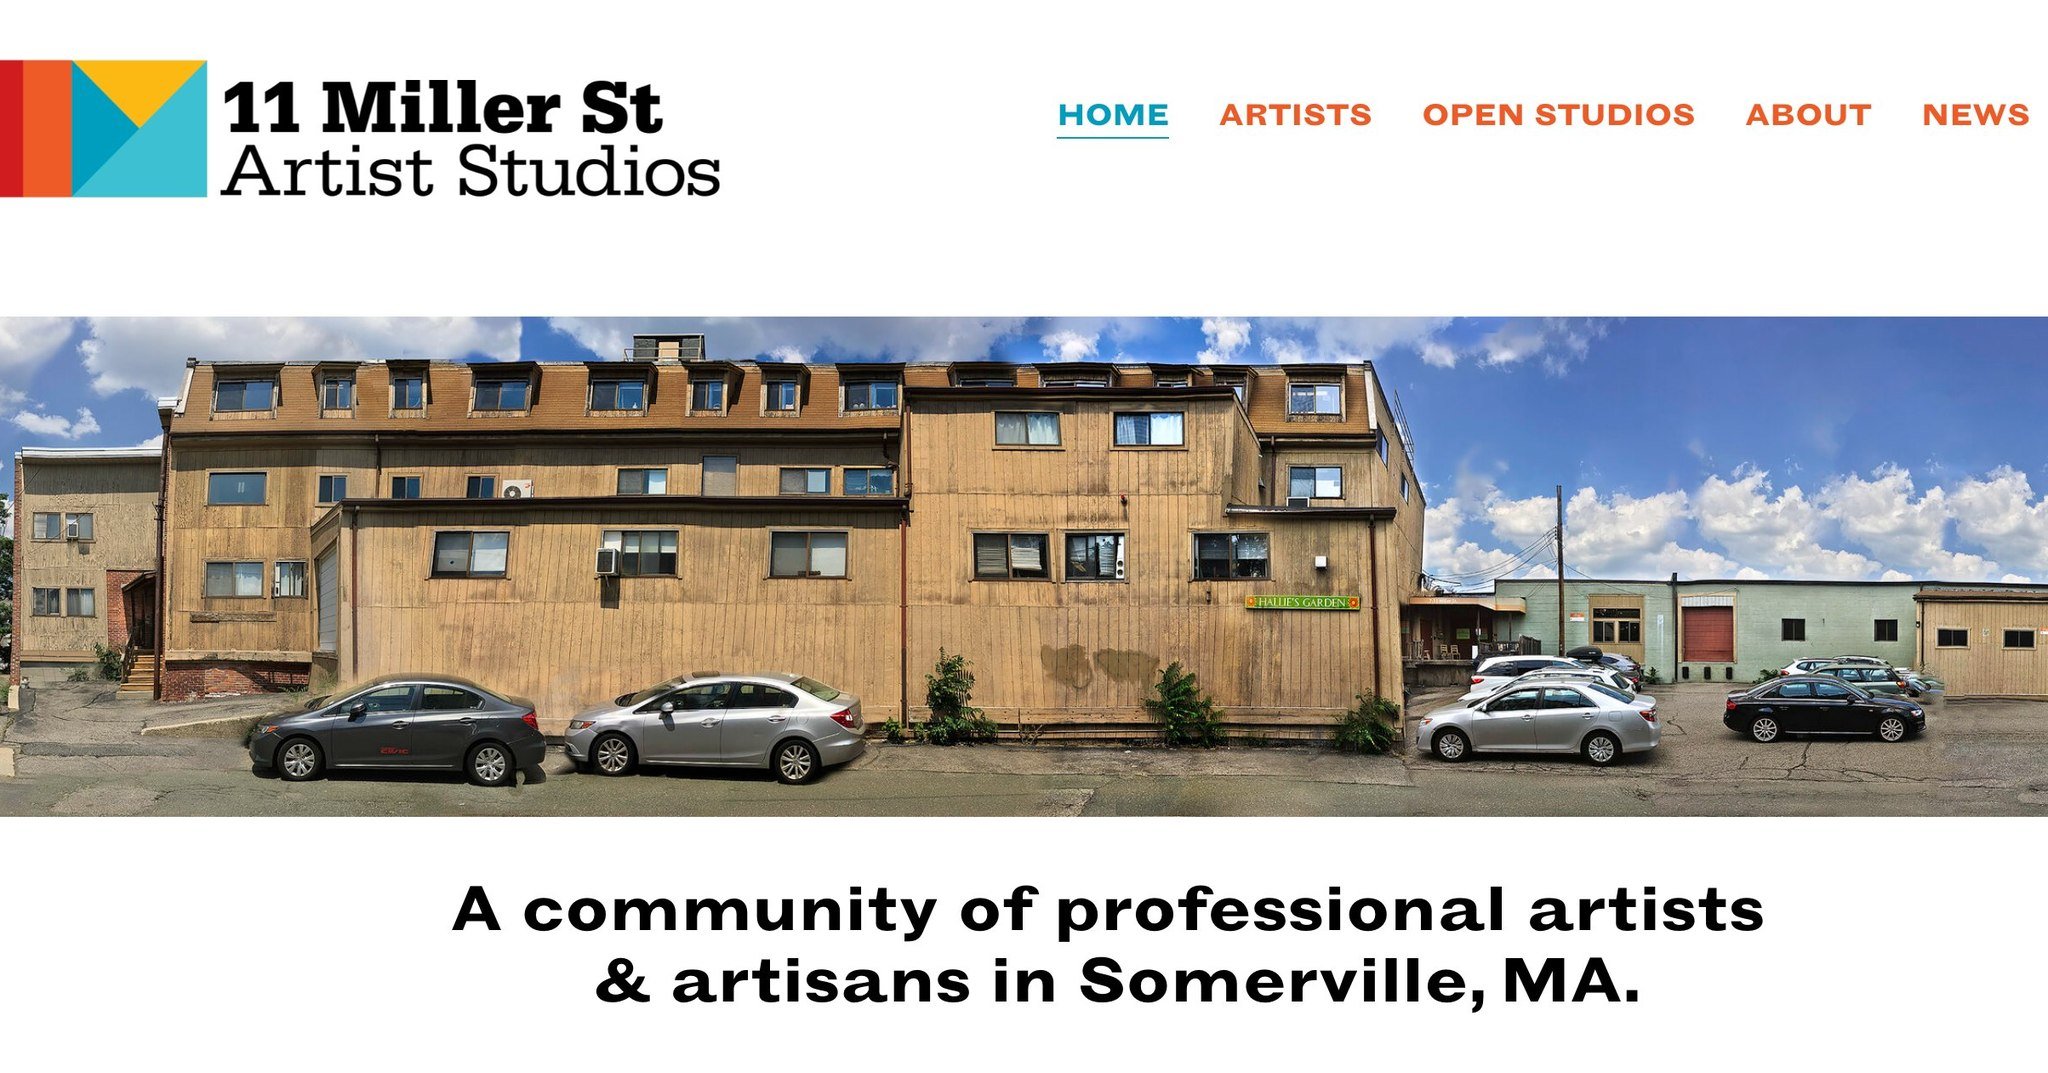 🎨 Dive into creativity! Did you know Somerville has the largest per capita number of artists outside NYC? 🌟 Today, we're spotlighting three artist buildings in the city: @11millerstreetstudios, @brickbottomartists, and @vernonstreetstudios.

Get a 